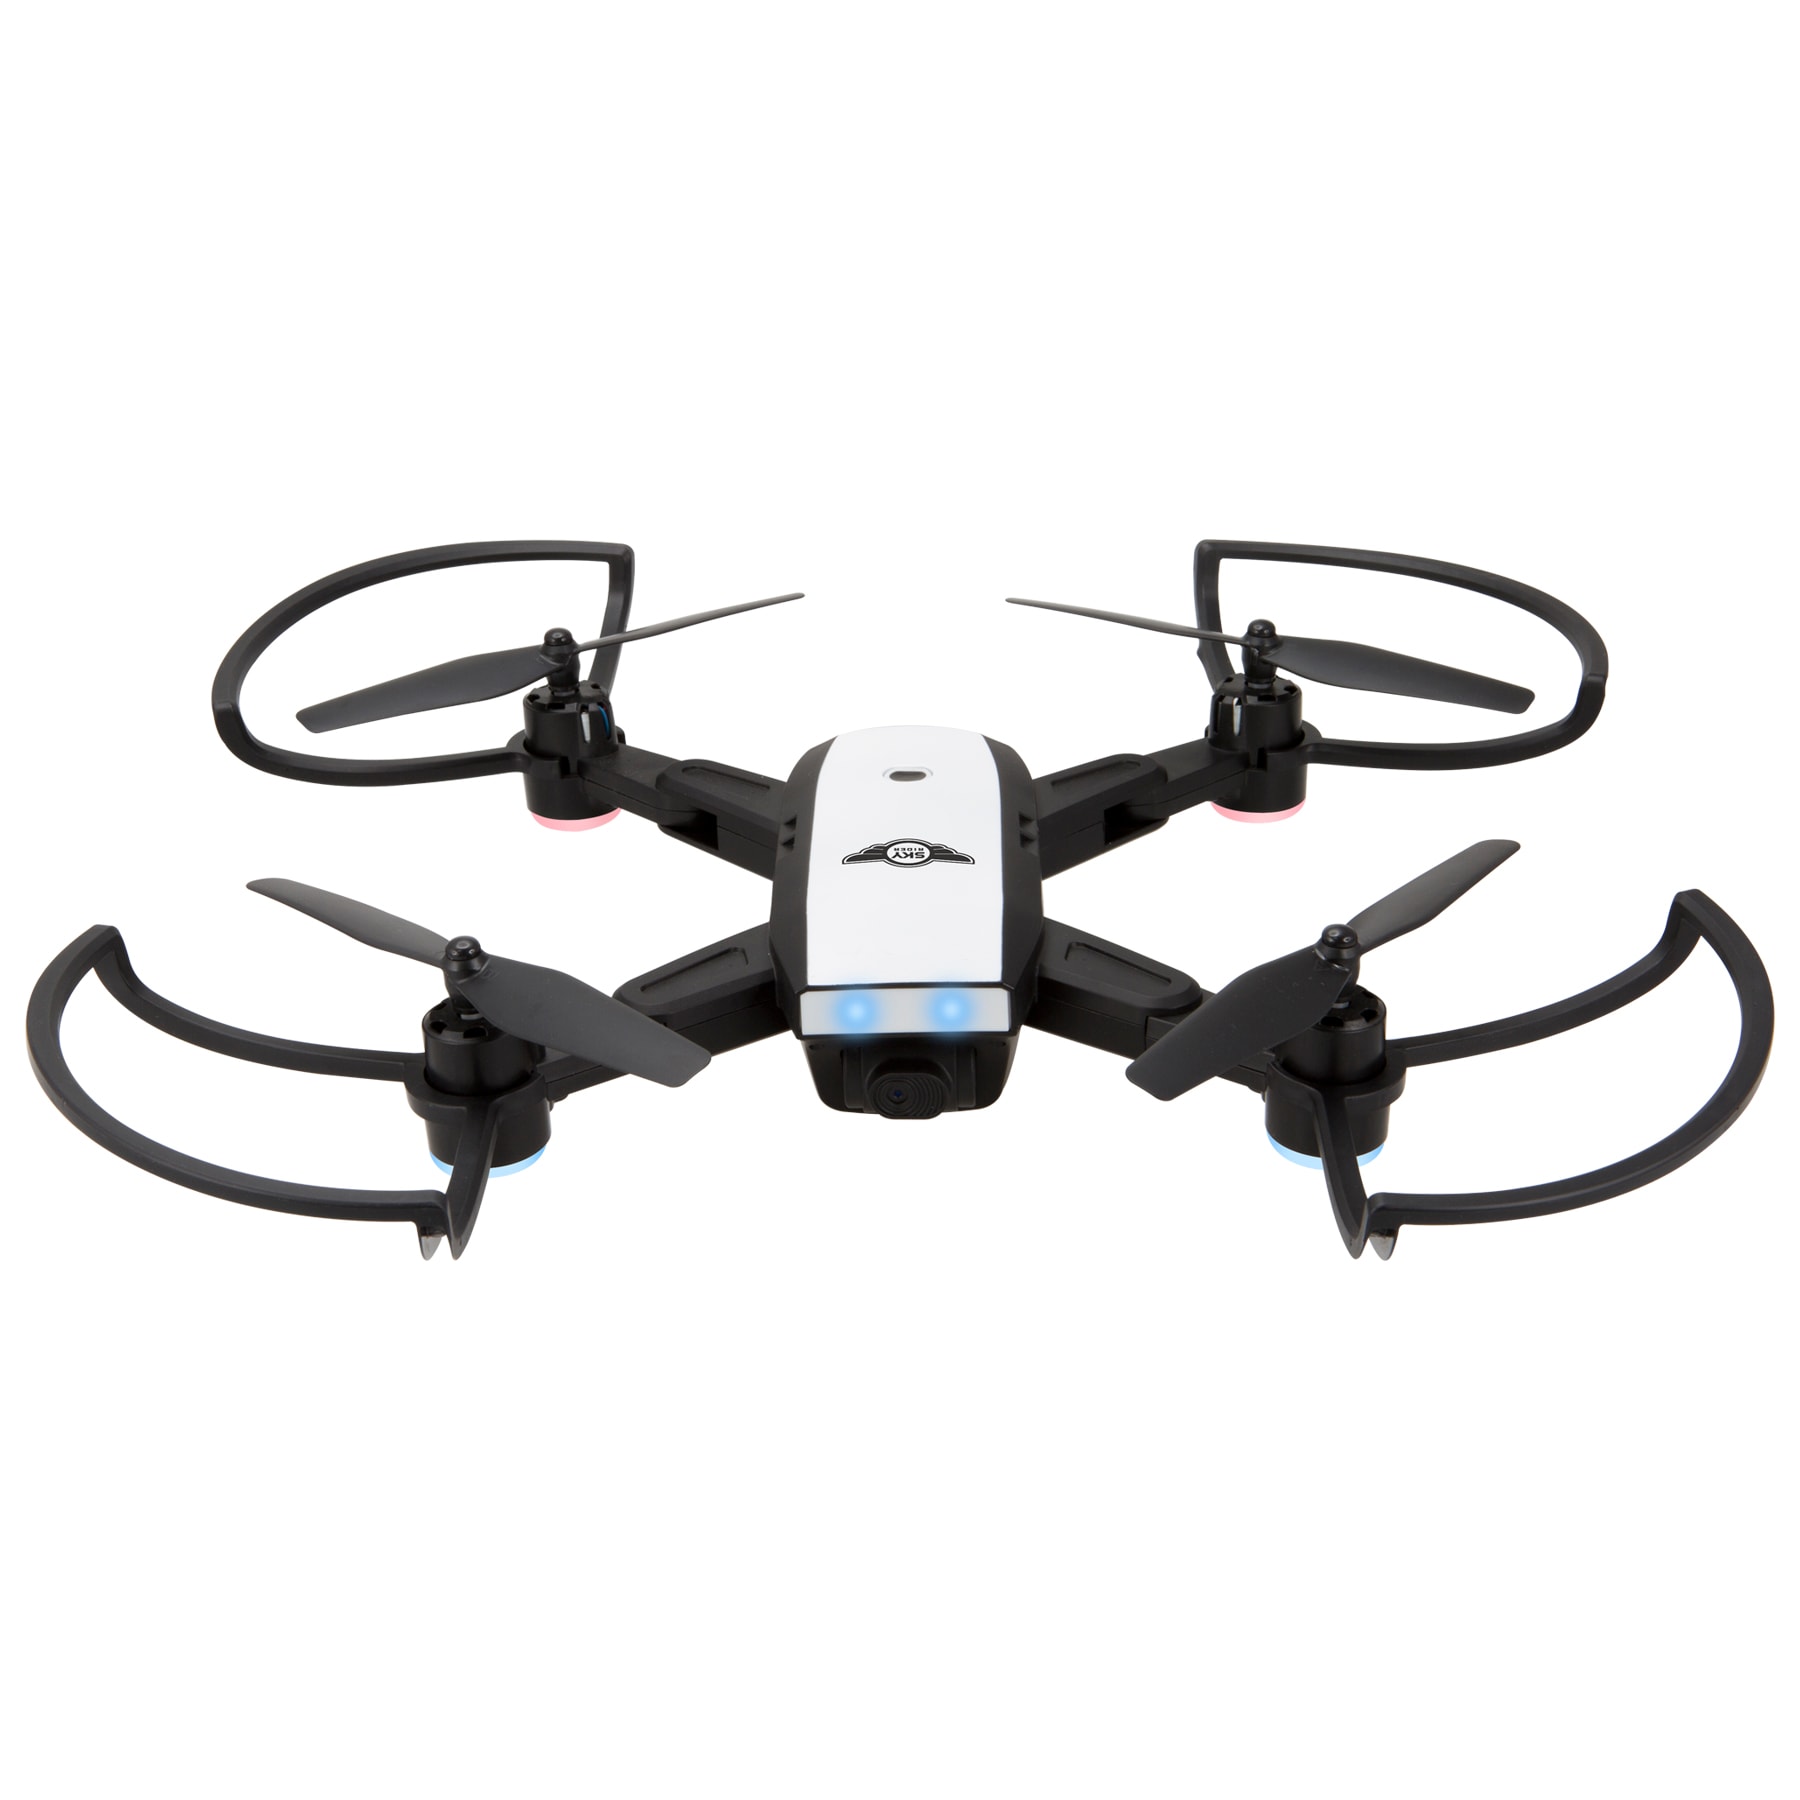 Reviews for SKY RIDER Pro Quadcopter Drone with Wi-Fi Camera, Remote and  Phone Holder